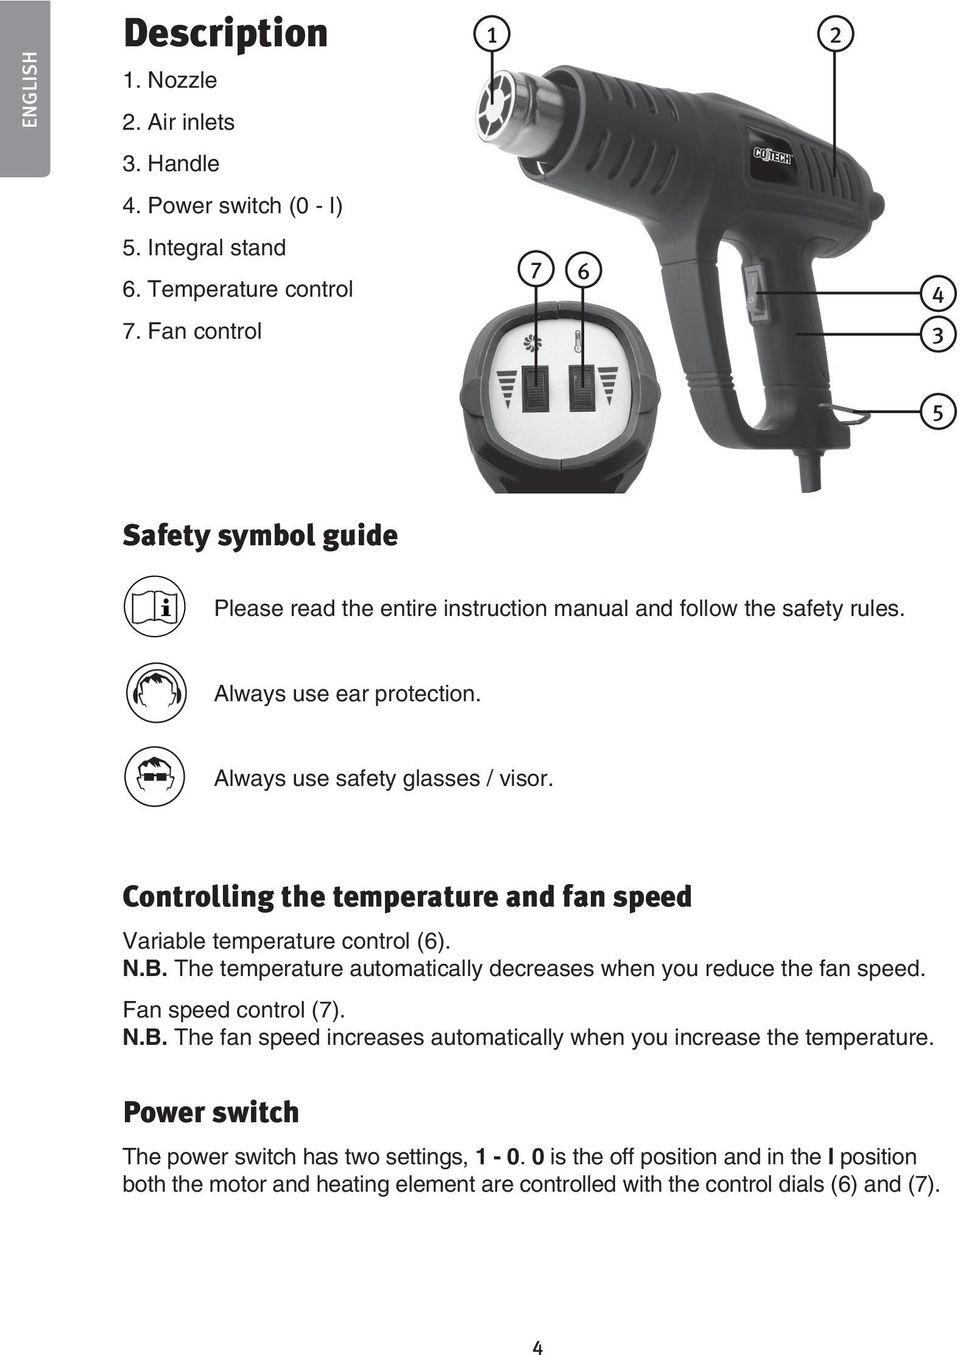 Controlling the temperature and fan speed Variable temperature control (6). N.B. The temperature automatically decreases when you reduce the fan speed. Fan speed control (7). N.B. The fan speed increases automatically when you increase the temperature.